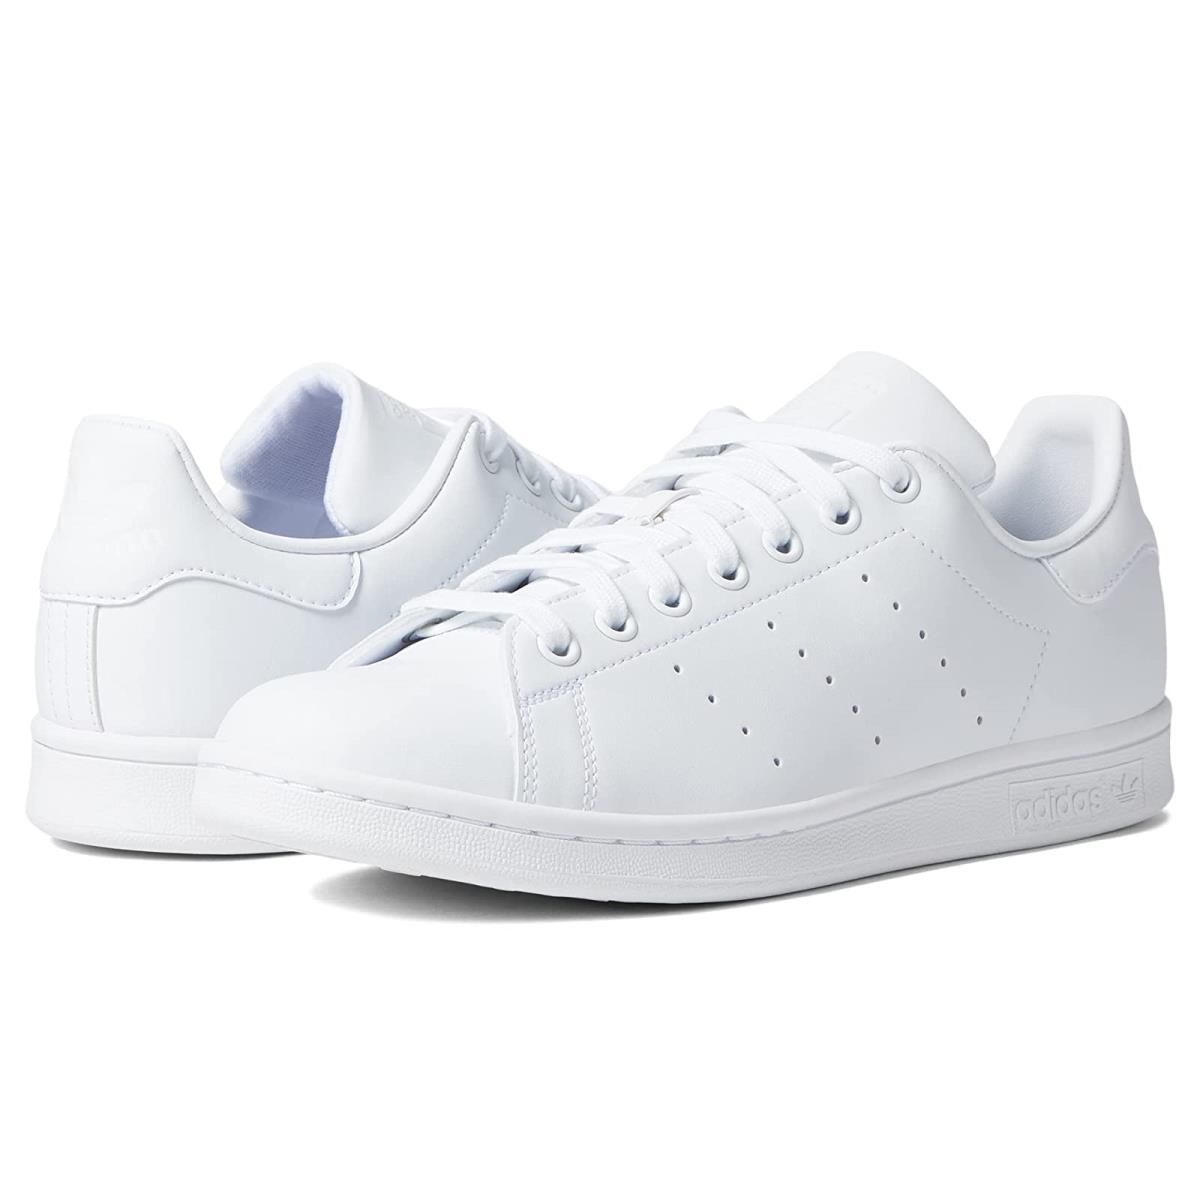 Woman`s Sneakers Athletic Shoes Adidas Originals Stan Smith Footwear White/Core Black/Footwear White